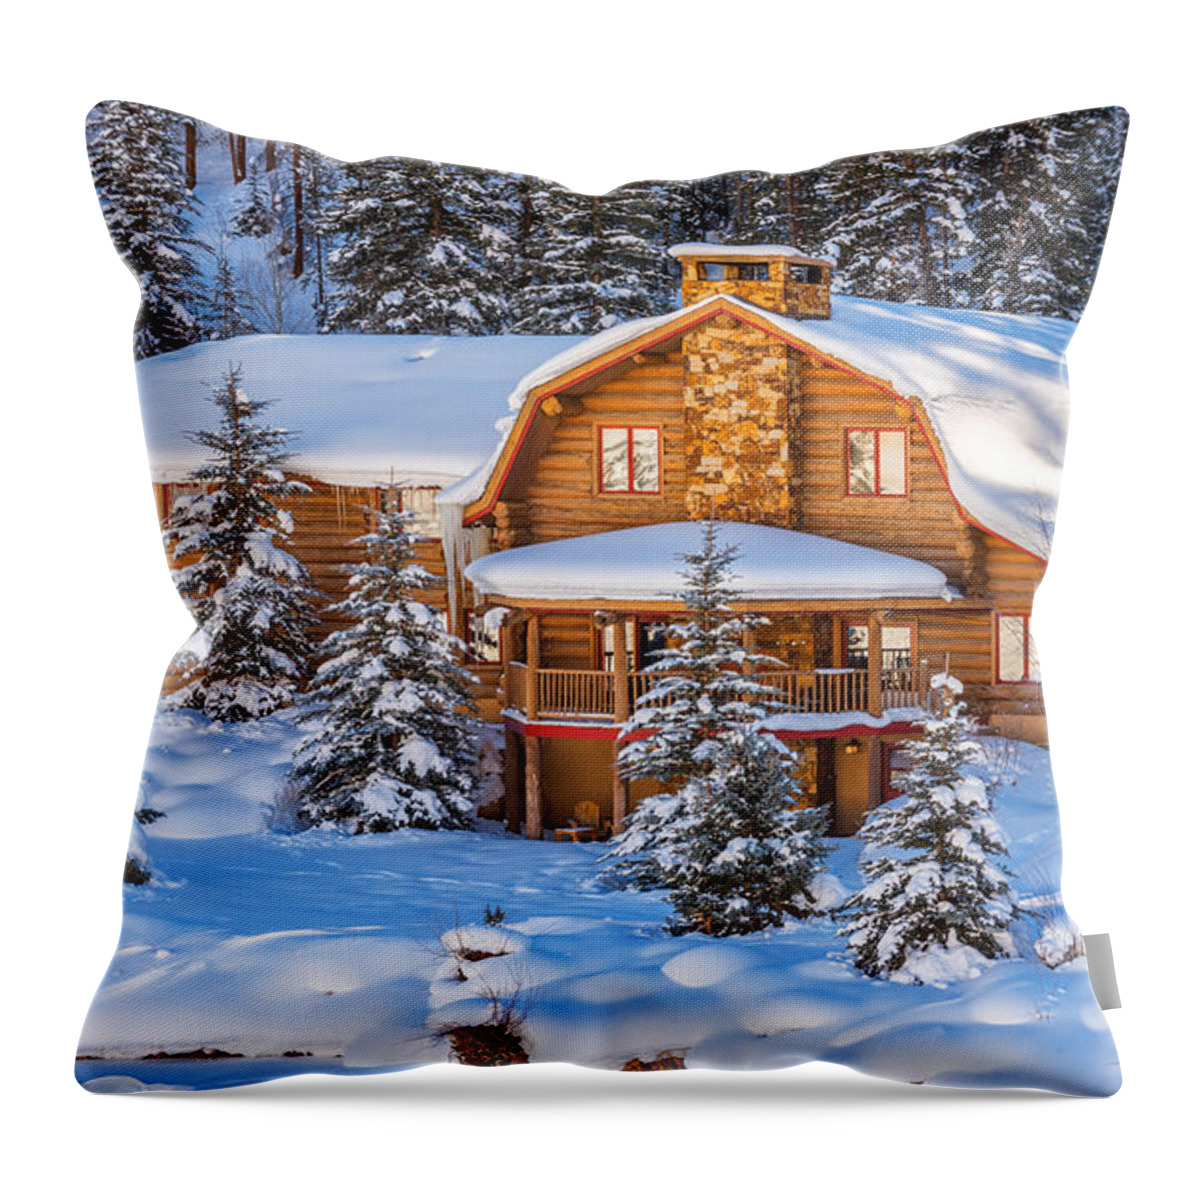 Dream Home Throw Pillow featuring the photograph Vail Chalet by Darren White